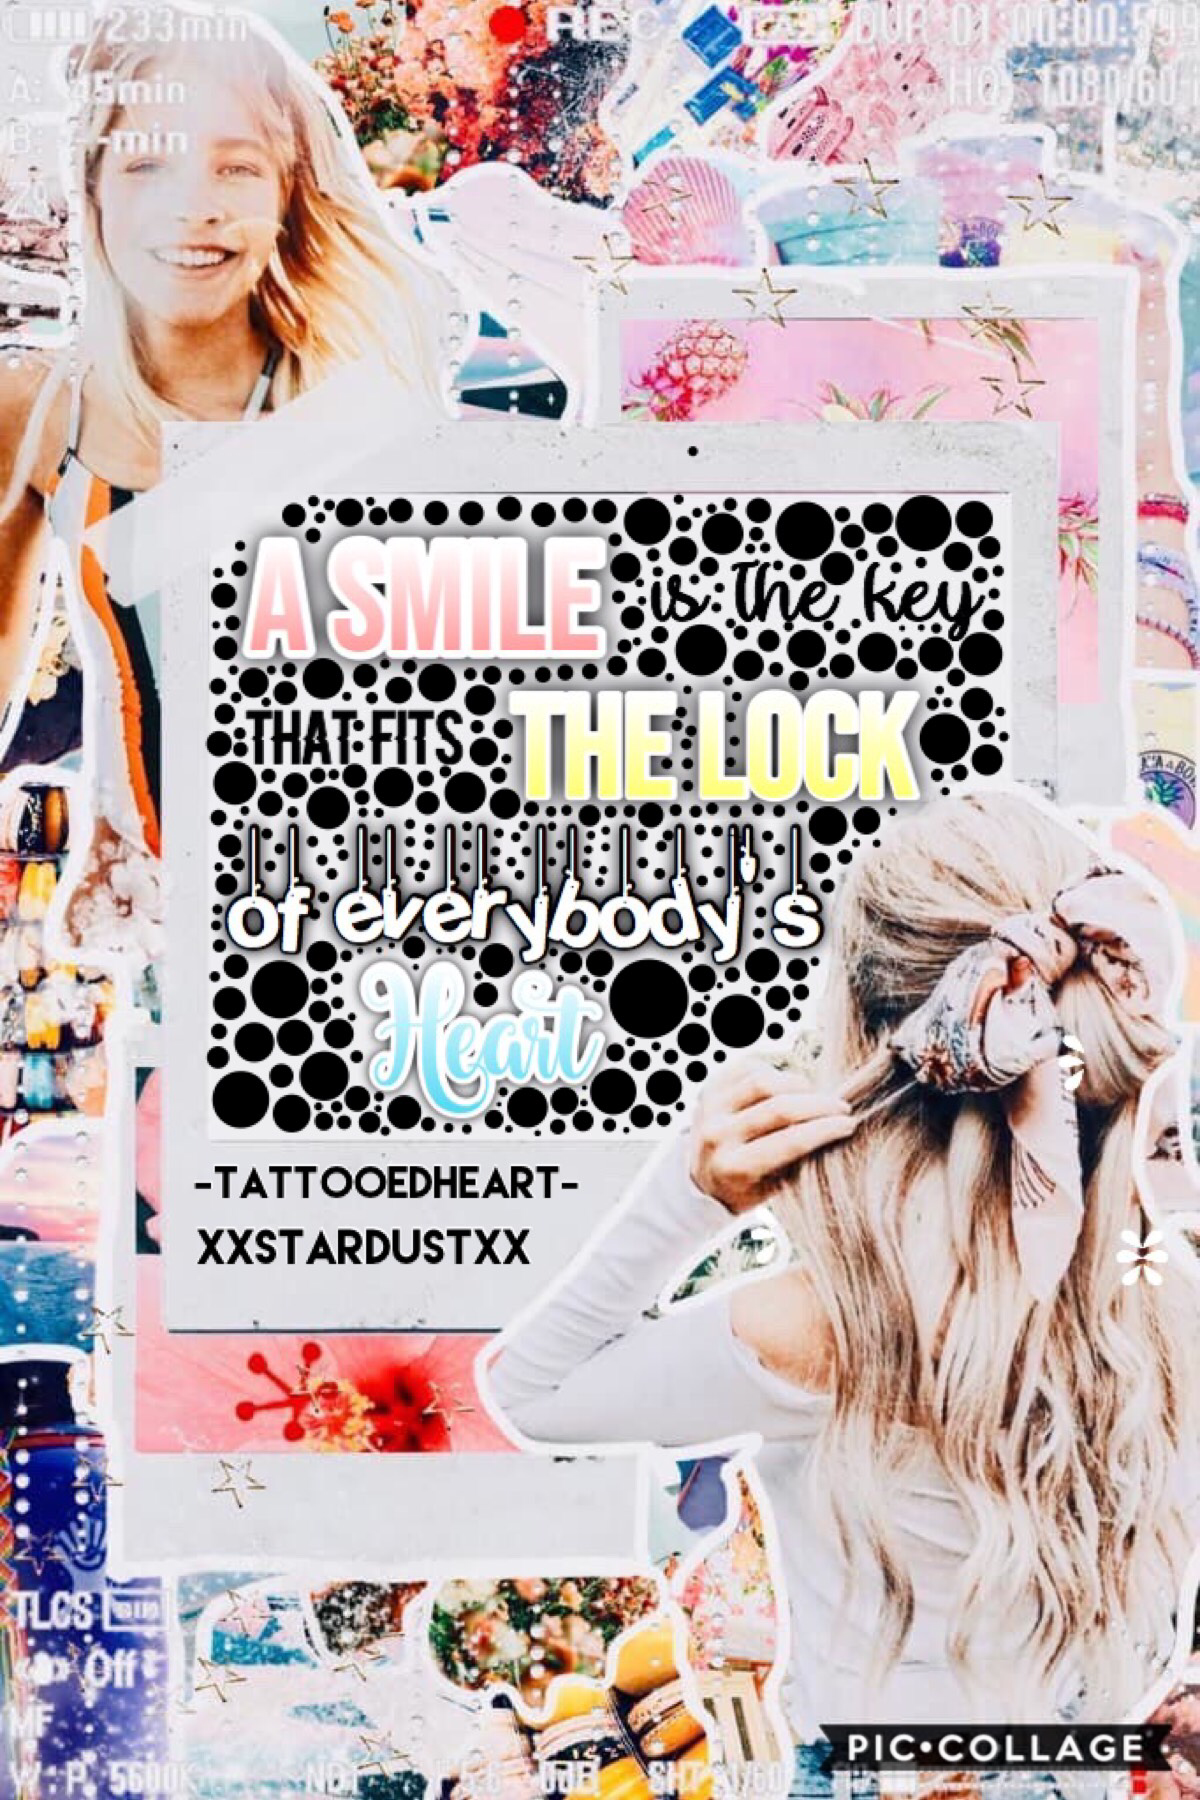 COLLAB WITH THE FABULOUS... (tap)
xXStarDustXx!!! Go follow her and spam her right now! She is extremely talented! I enjoyed collabing with you!